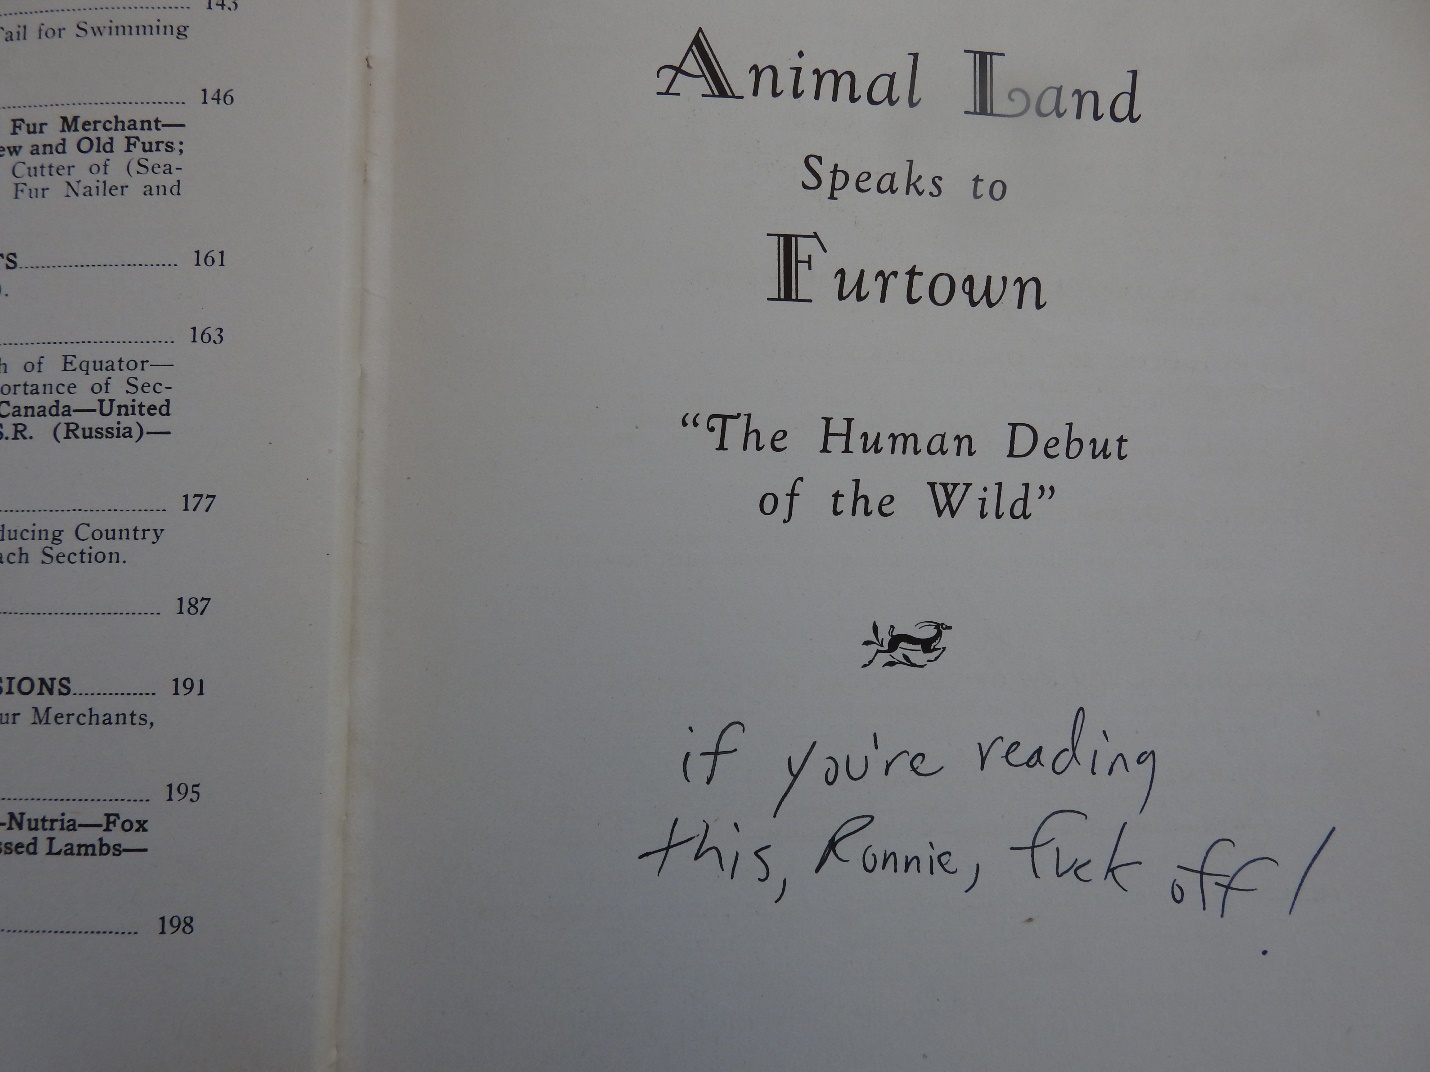 Photograph of the title page of the book 'Animal Land Speaks to Furtown', subtitled 'The Human Debut of the Wild'. A handwritten note underneath the subtitle says, 'if you're reading this, Ronnie, fuck off!'